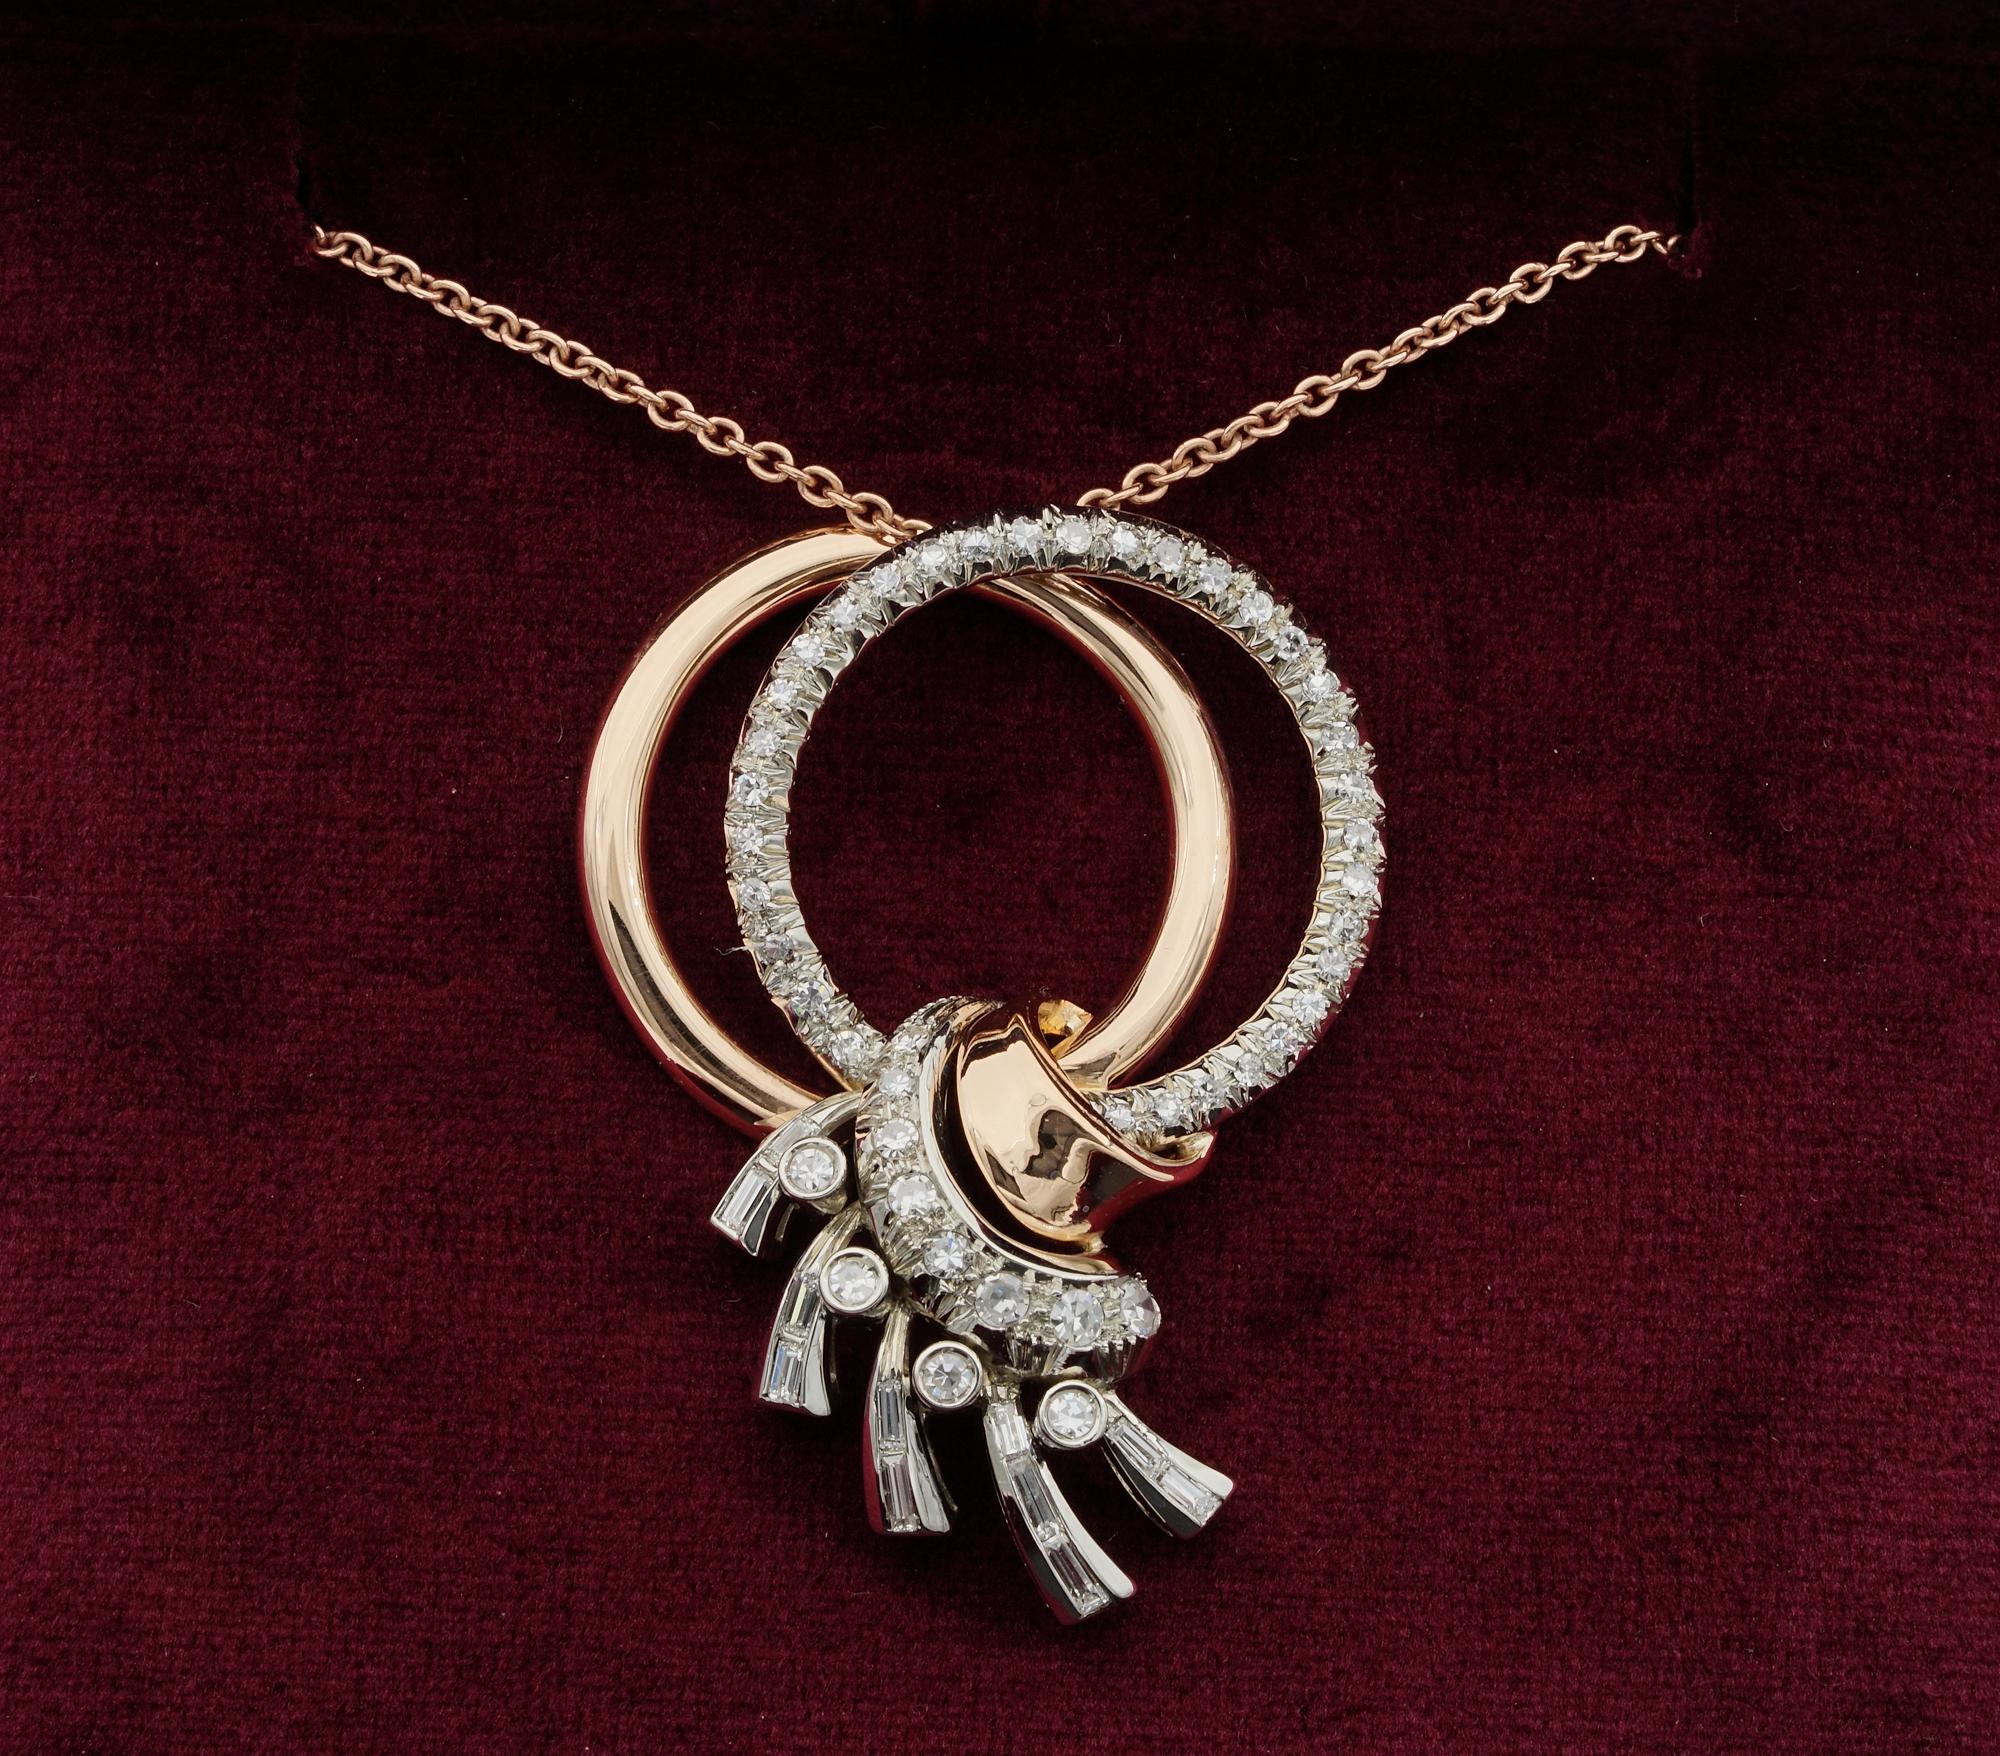 Endless Charm

Late Art Deco dating 1935 circa double hoop pendant with a large Diamond bow connecting the two circles
Charming in design expressing in full the fashion of the era
Skilfully hand crafted during the age of solid 18 KT rose gold and